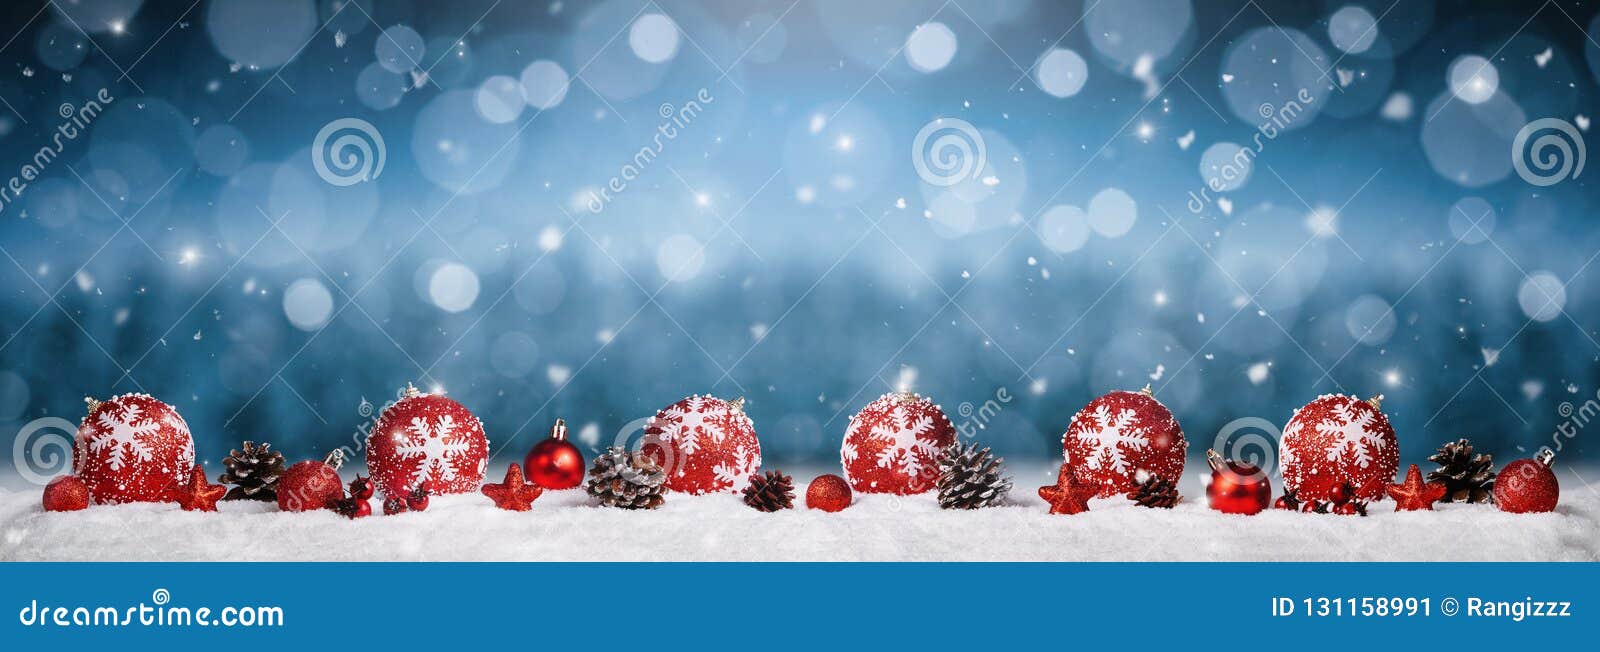 panoramic christmas ornaments background